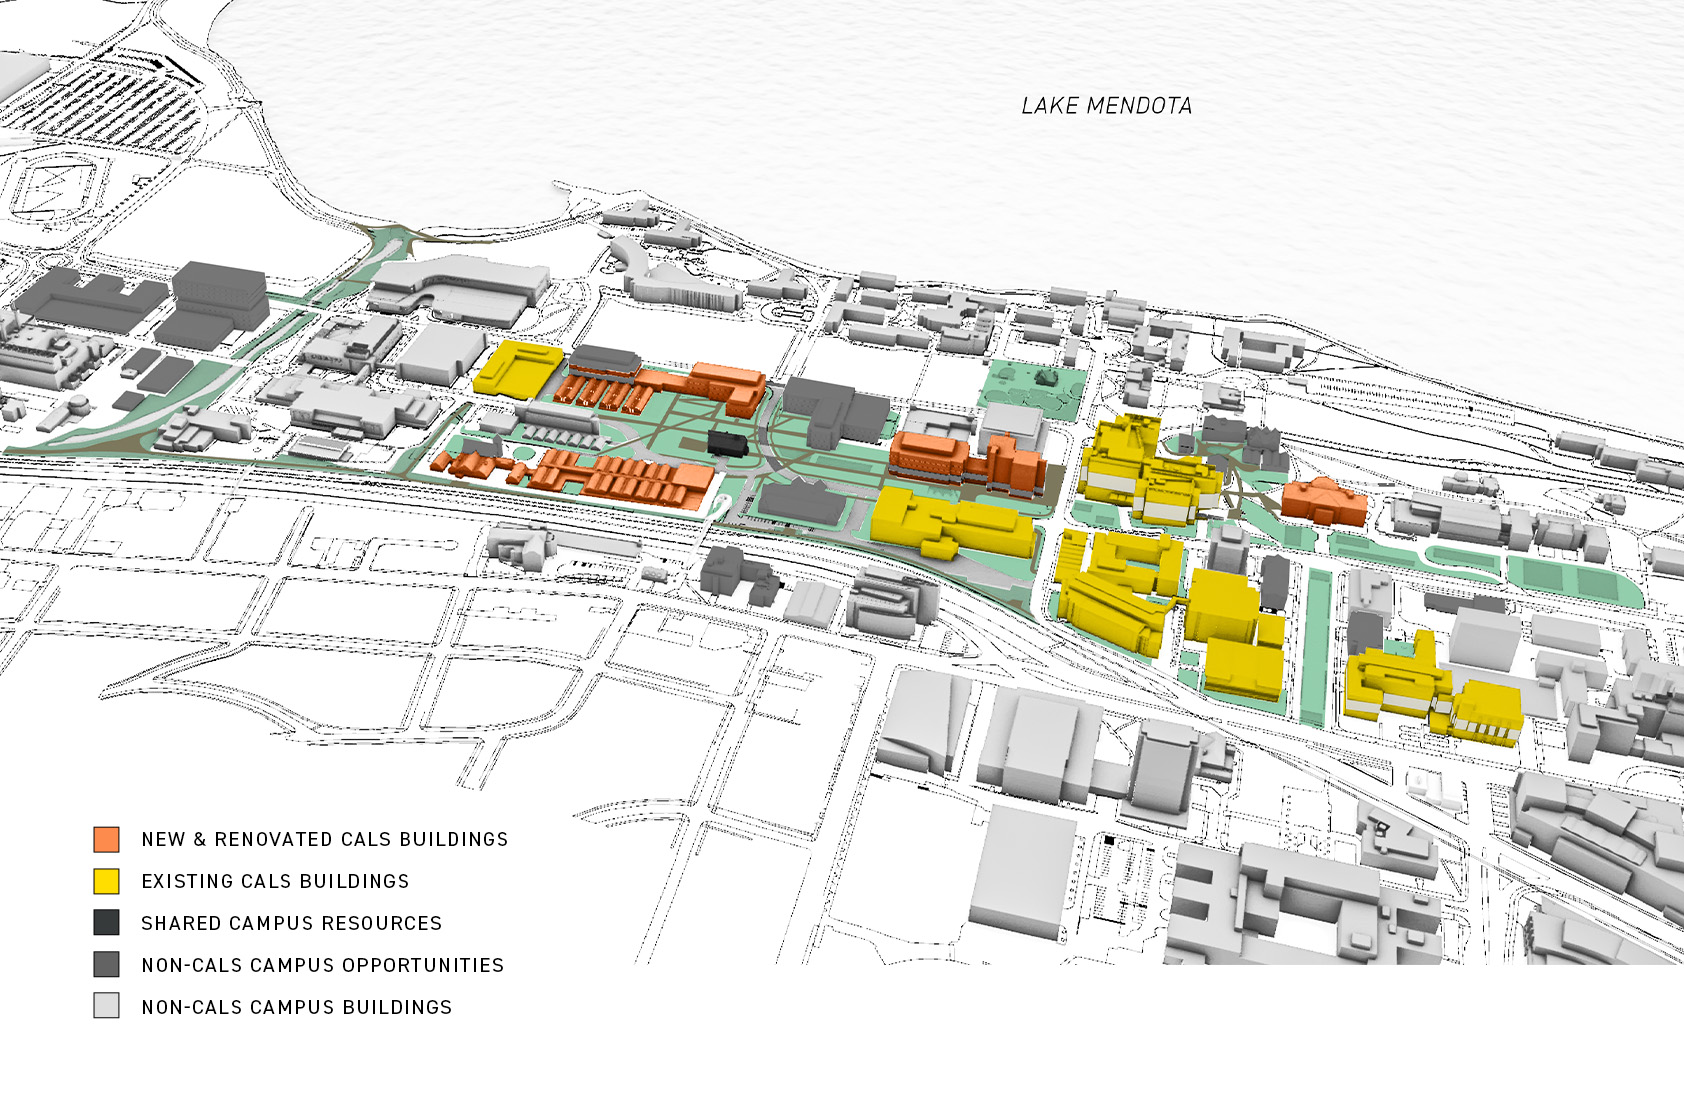 University of Wisconsin-Madison - College of Agricultural & Life Sciences Facilities Master Plan